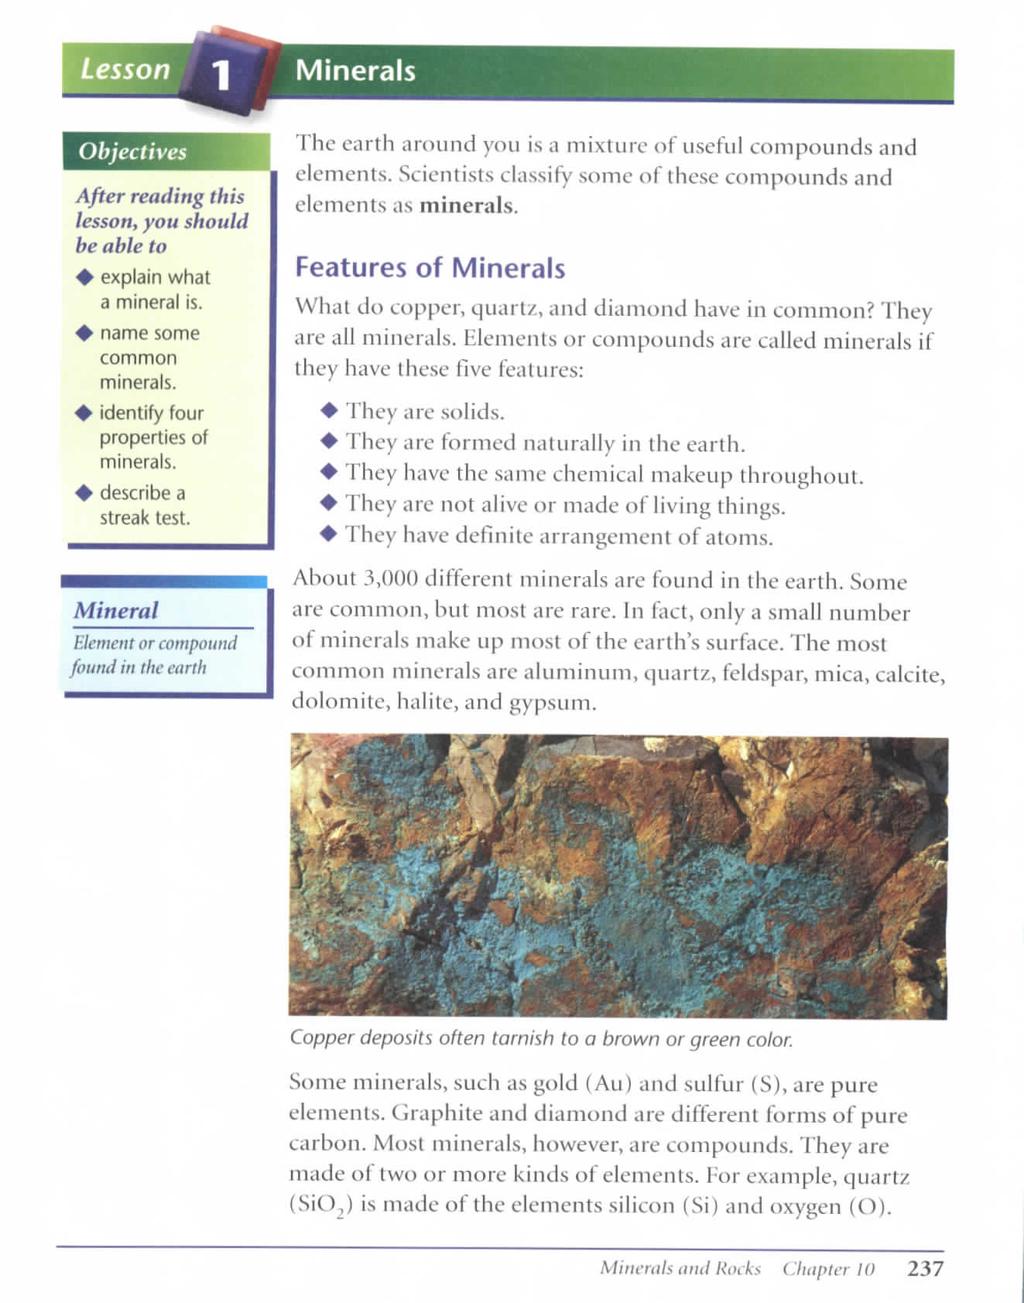 Lesson Minerals Objectives After reading this lesson, you should be able to + explain what a mineral is. + name some common minerals. ^ identify four properties of minerals. + describe a streak test.